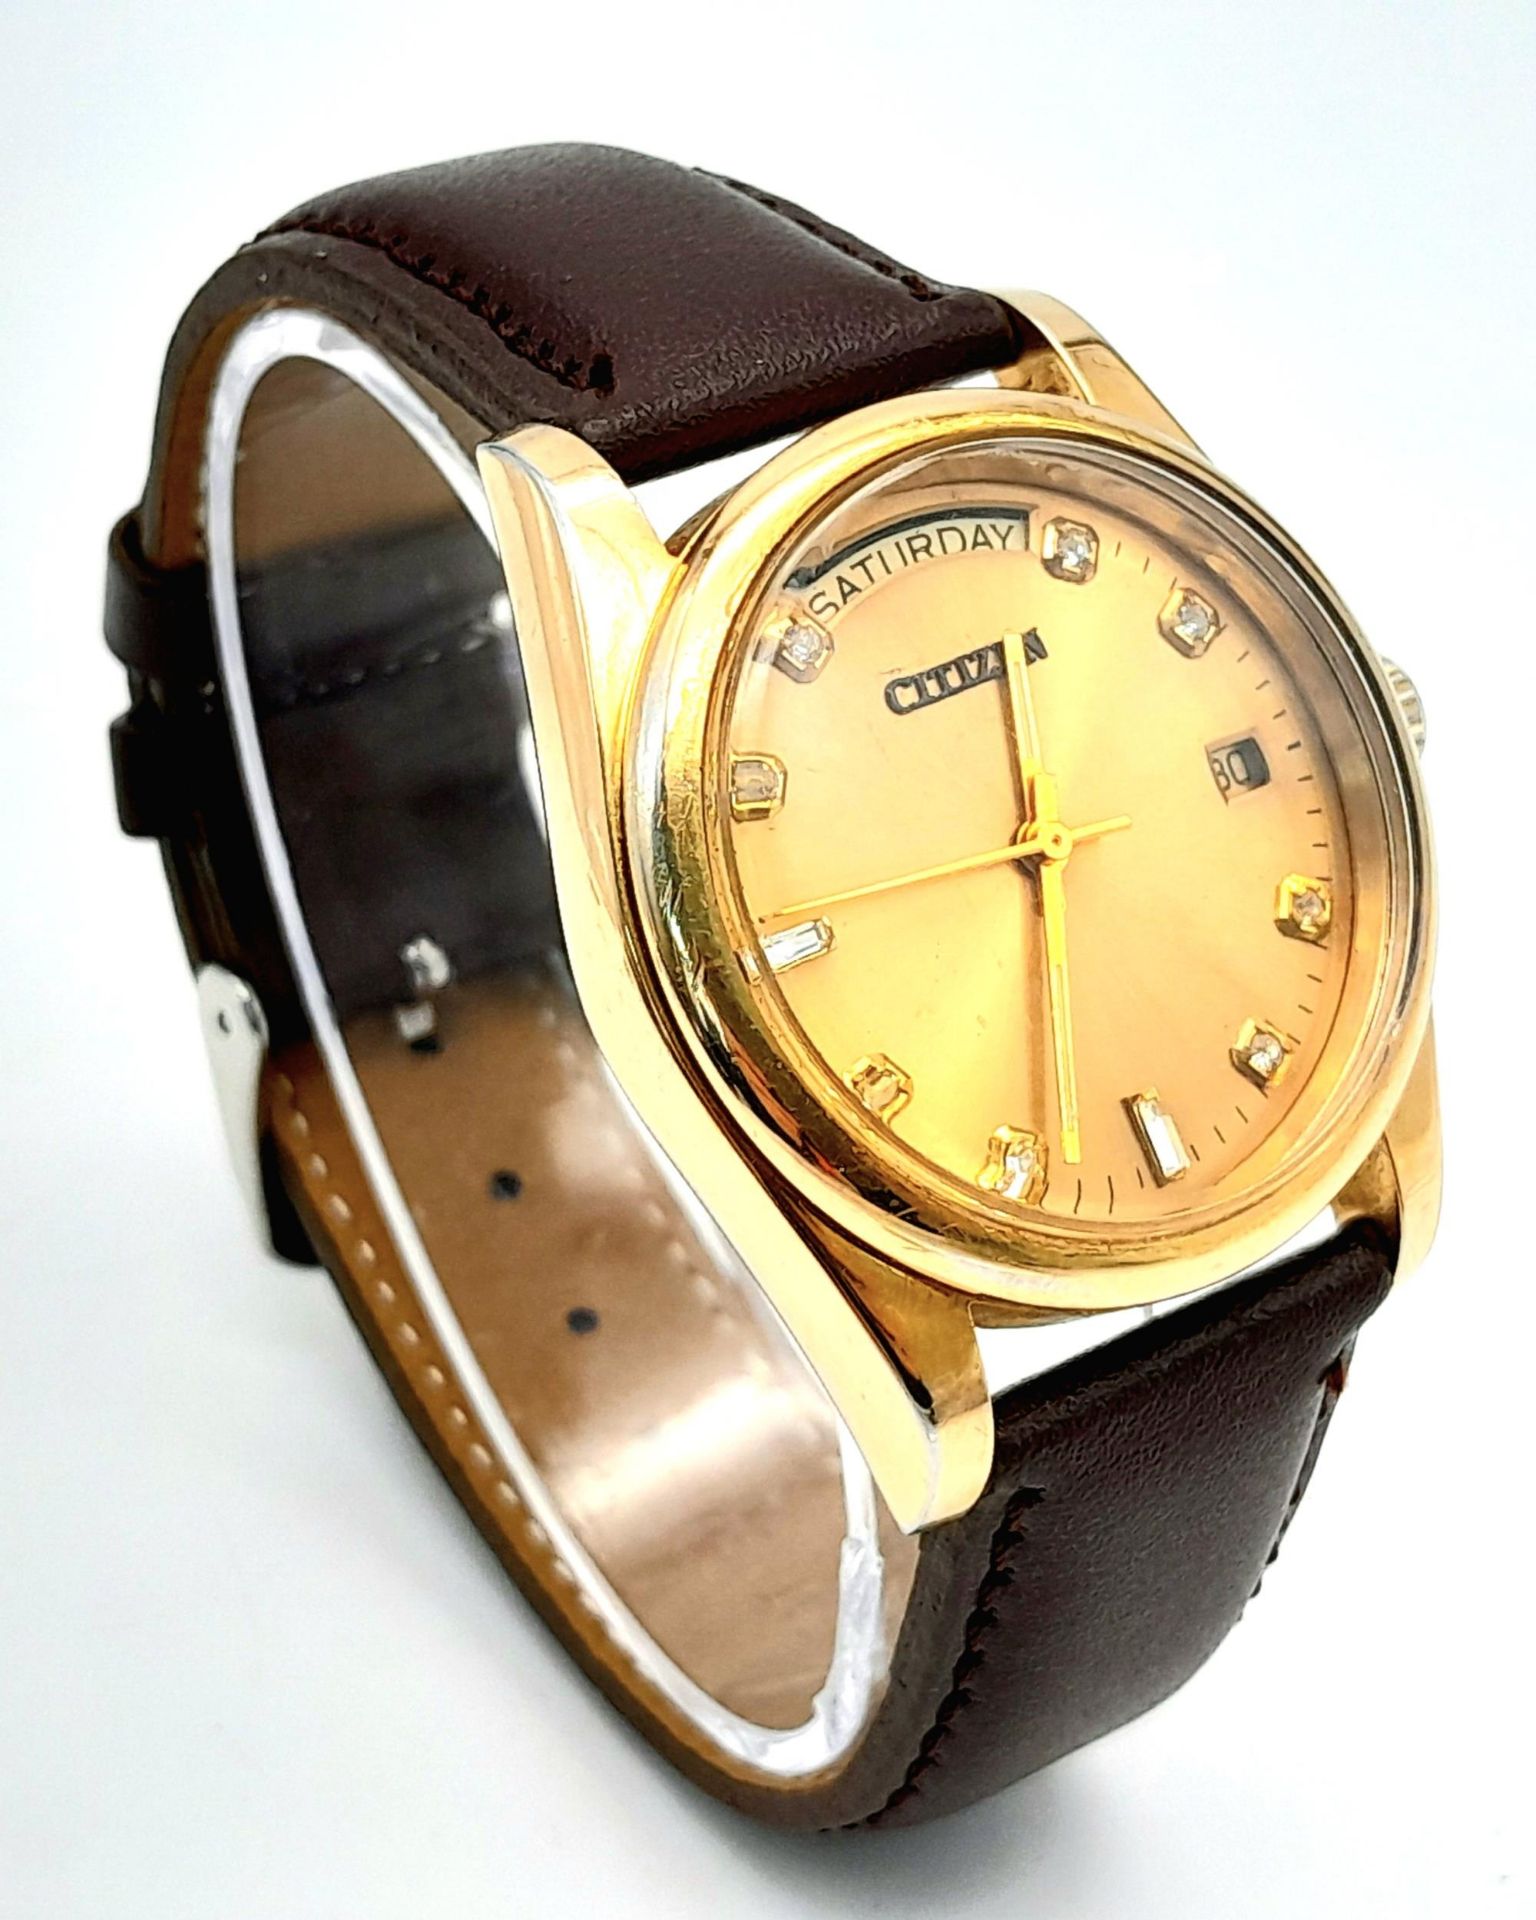 A Citizen Automatic Stone Set Watch. Brown leather strap. Gold plated case - 36mm. Gold tone dial - Bild 3 aus 6